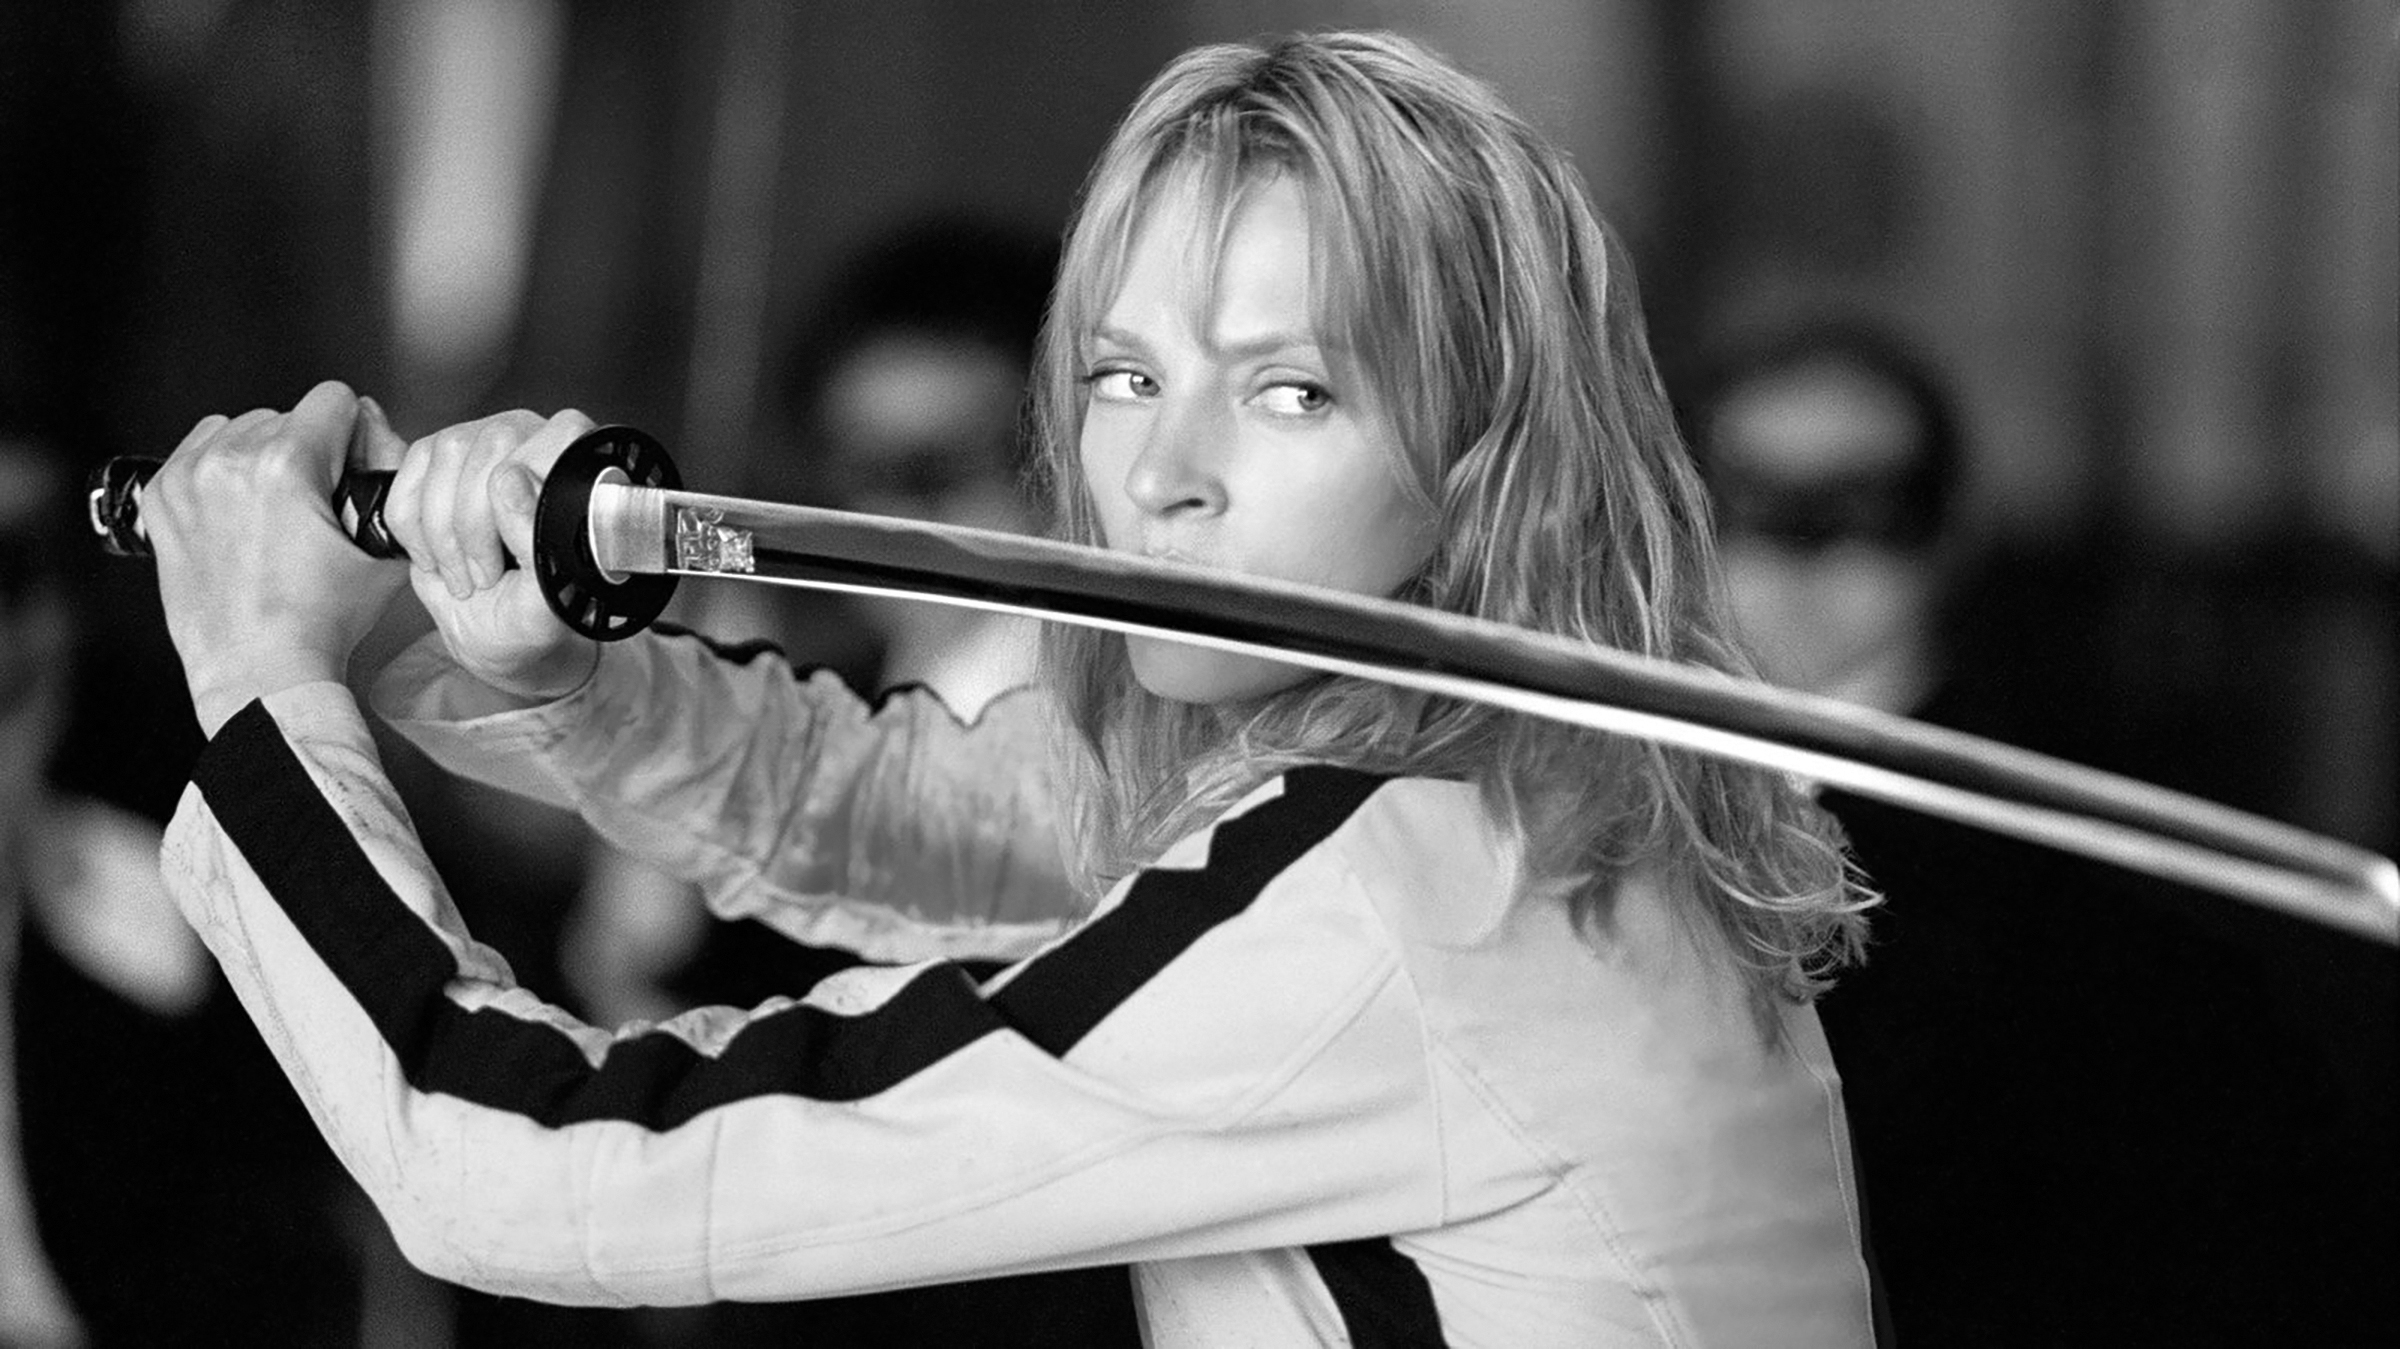 A Week of Film Reviews: The Art of Sound in “Kill Bill Vol. 1”